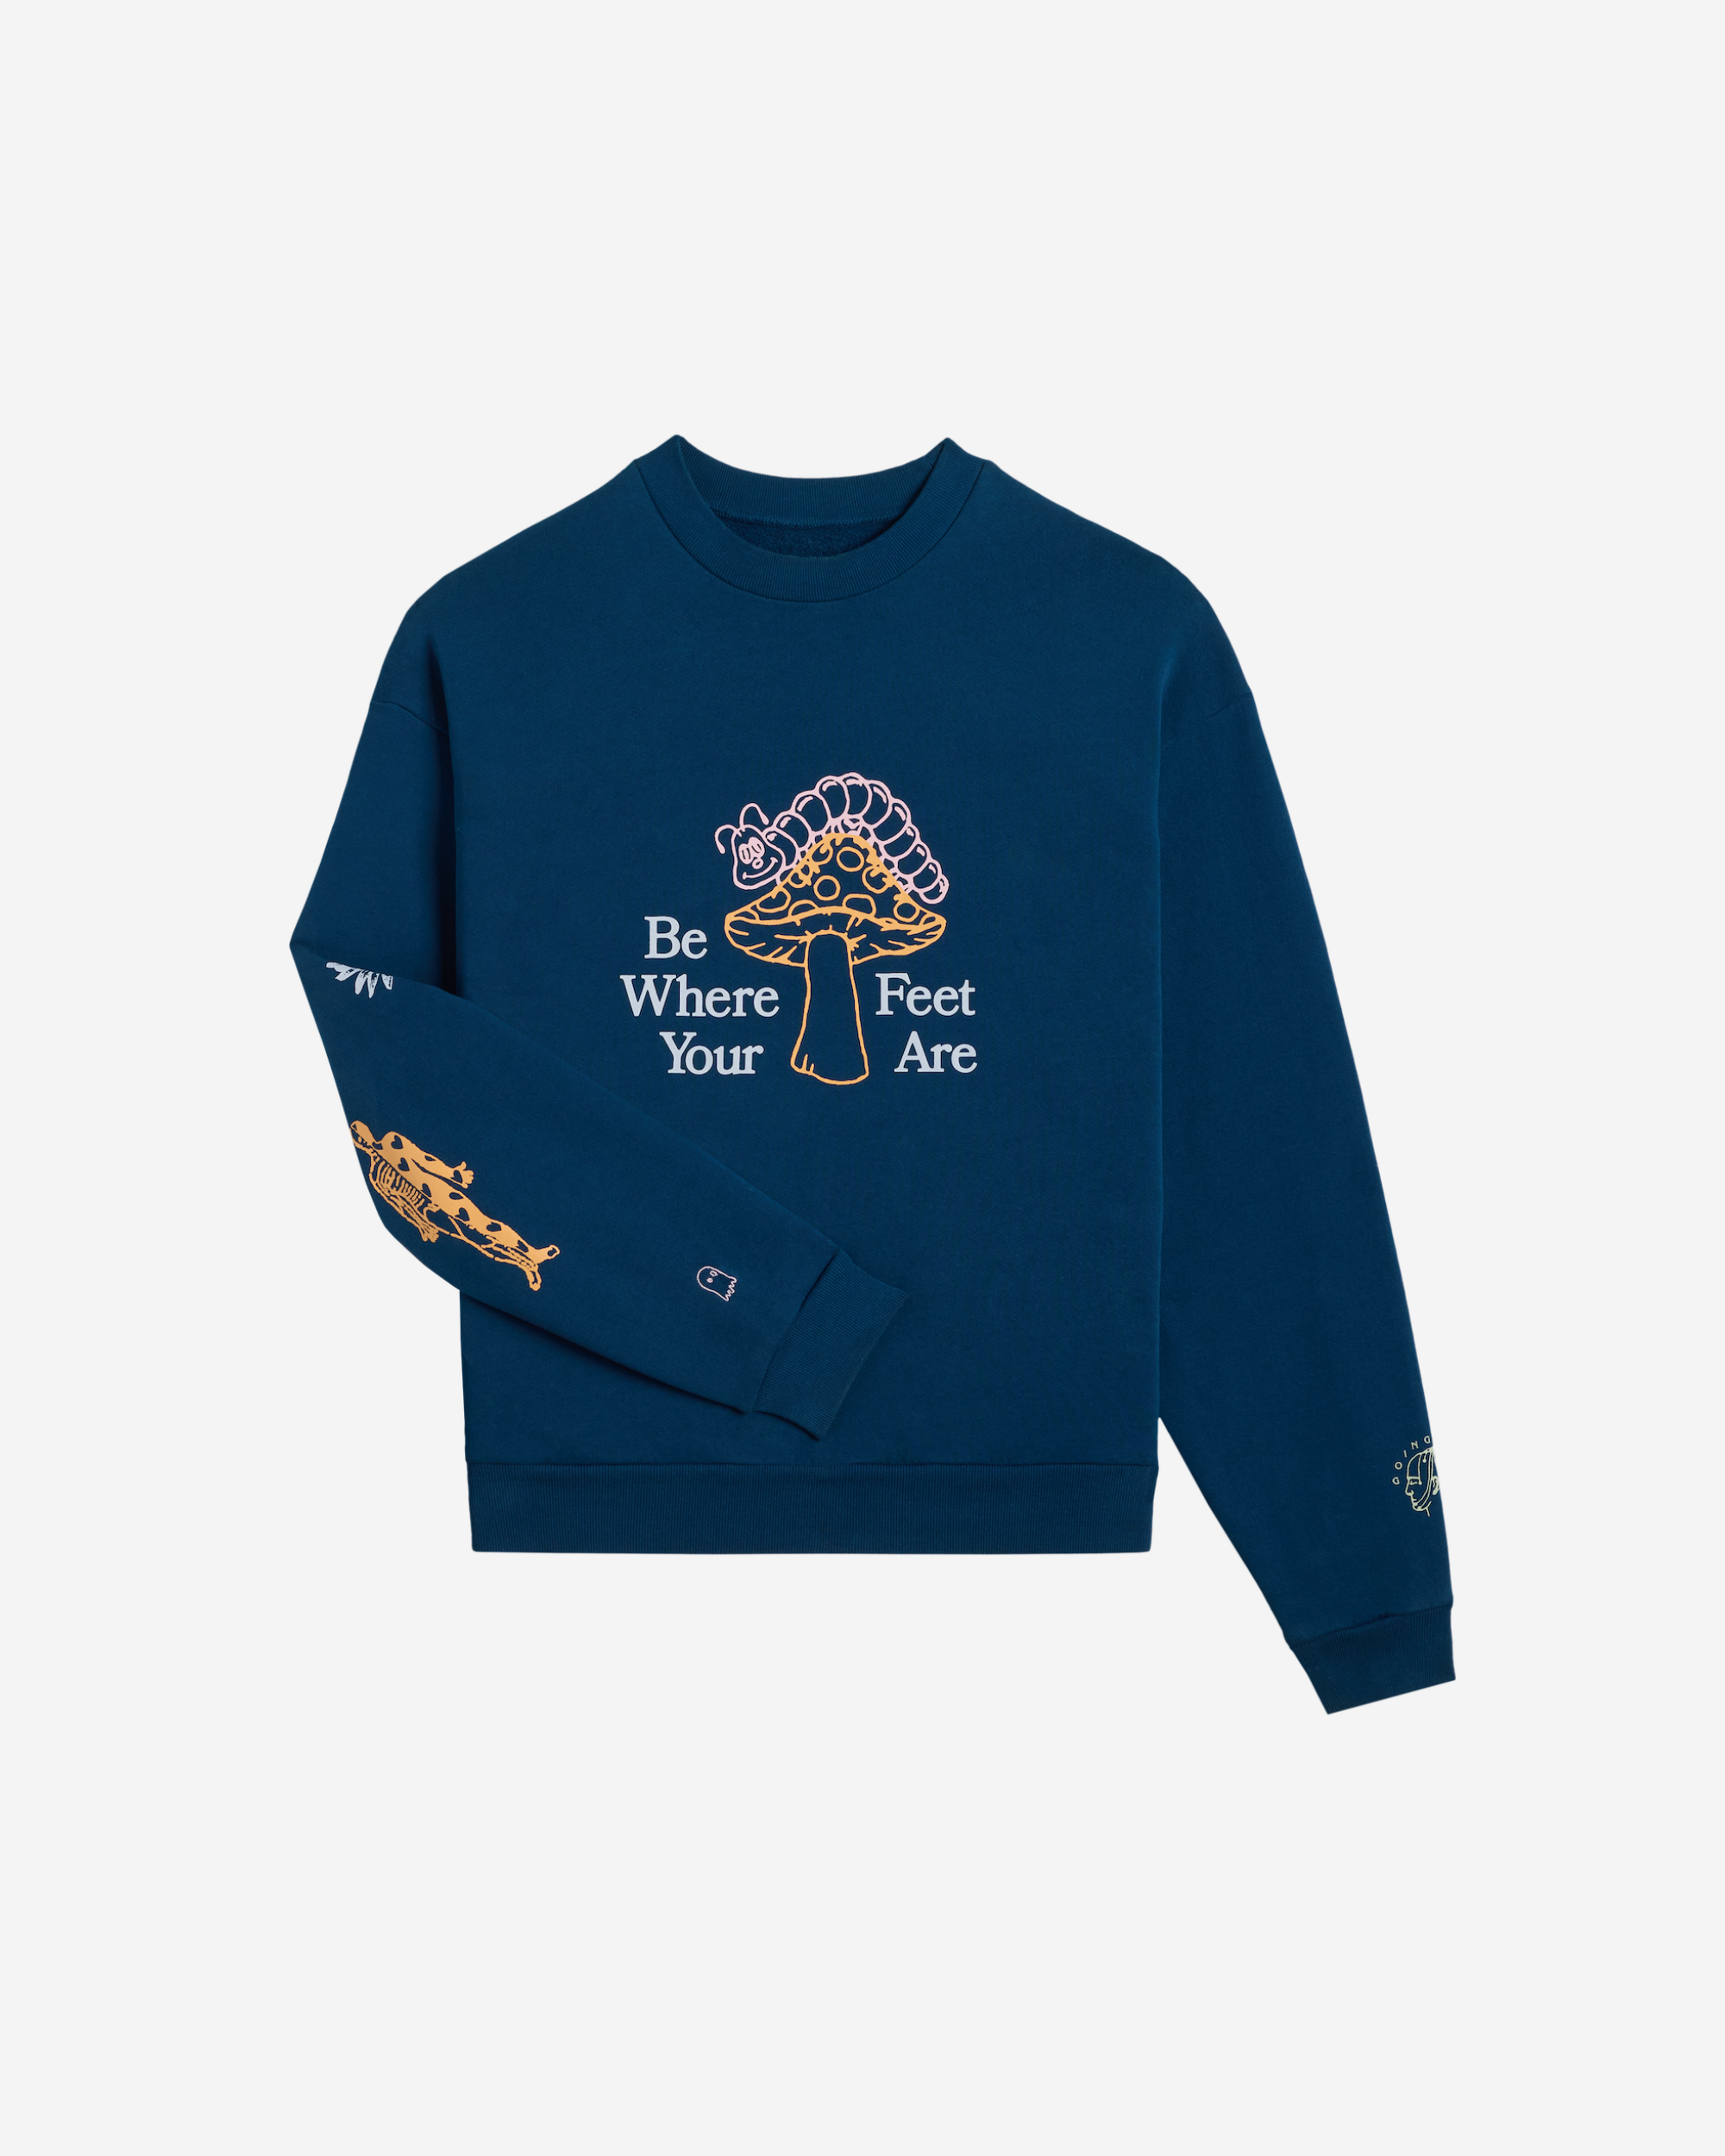 Be Where Your Feet Are Heavyweight Crewneck Sweater